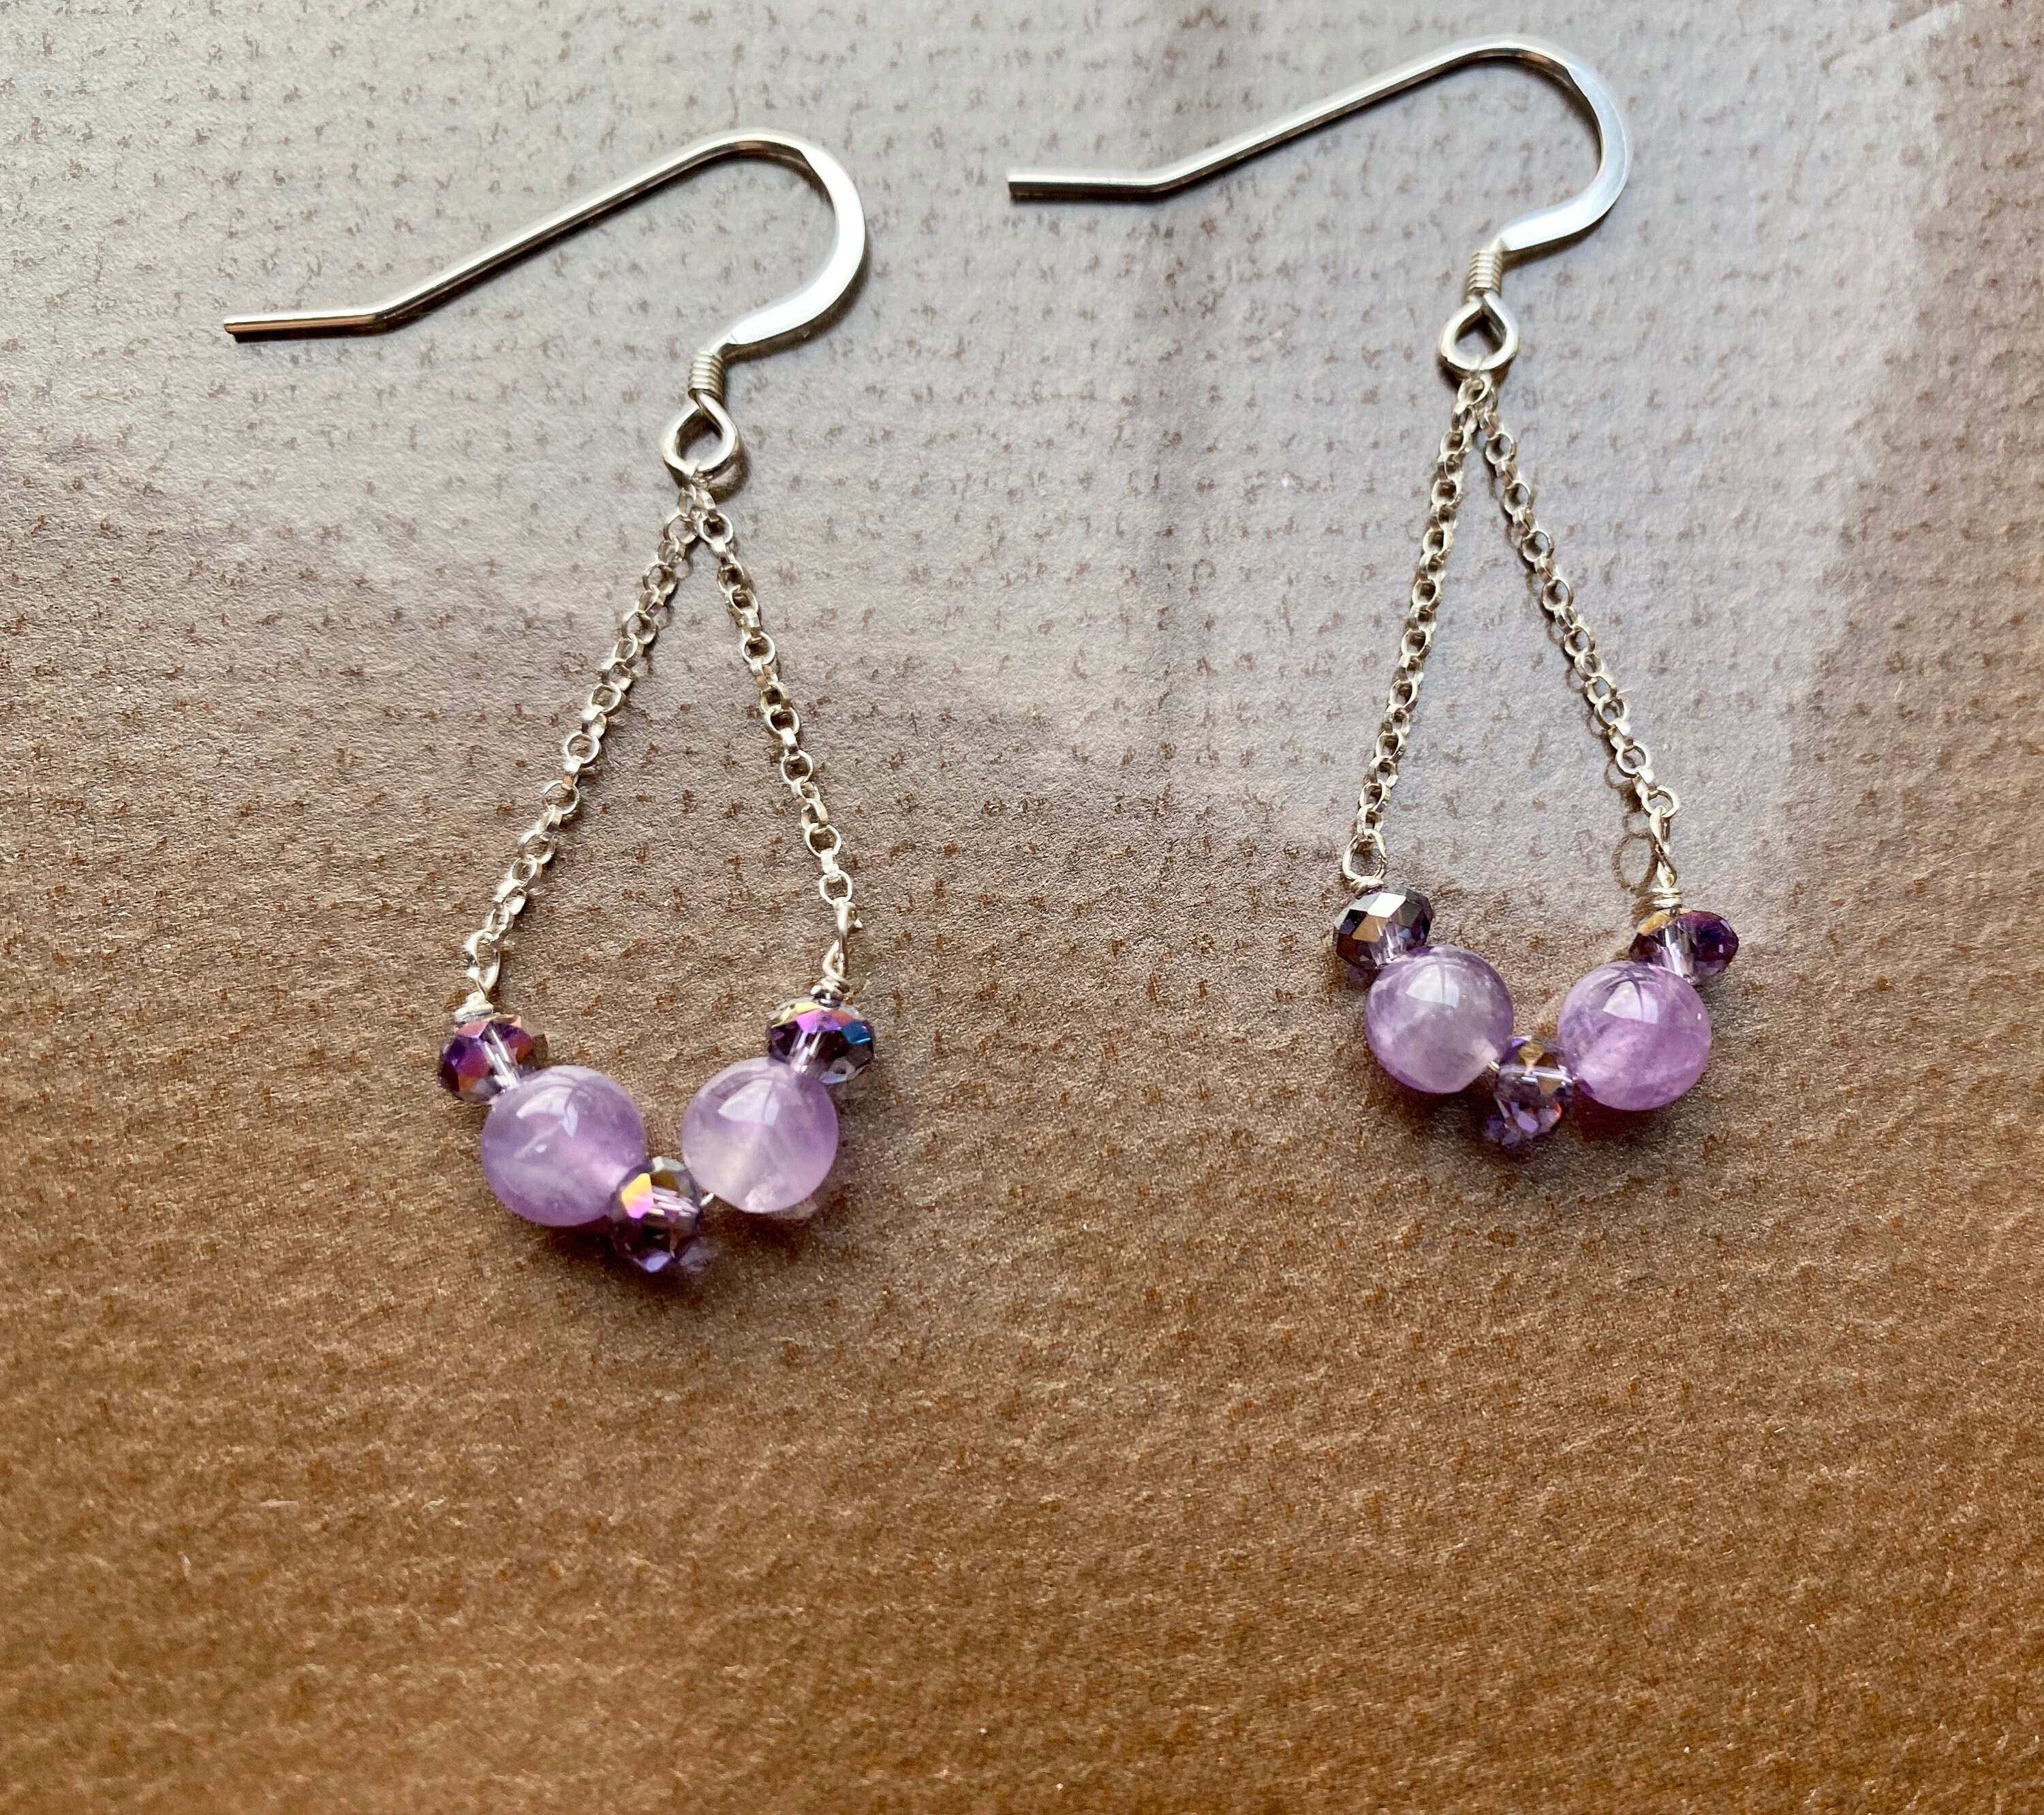 Gorgeous Amethyst and Swarovski Crystal Earrings. 925 Sterling Silver ...